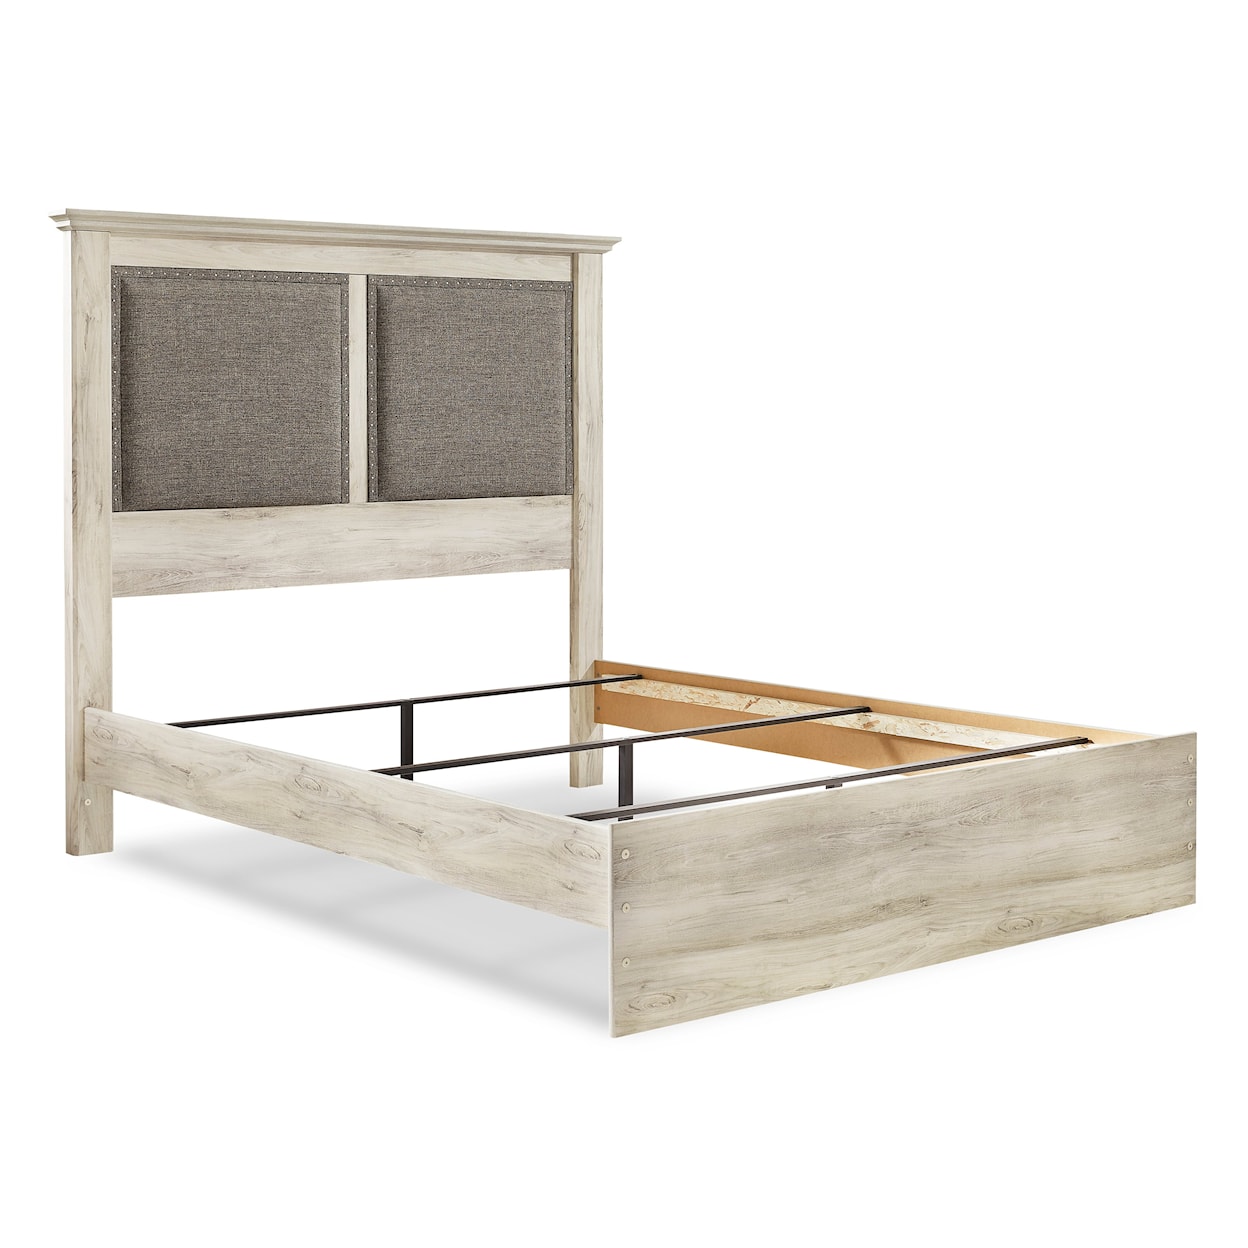 Michael Alan Select Cambeck King Upholstered Panel Bed